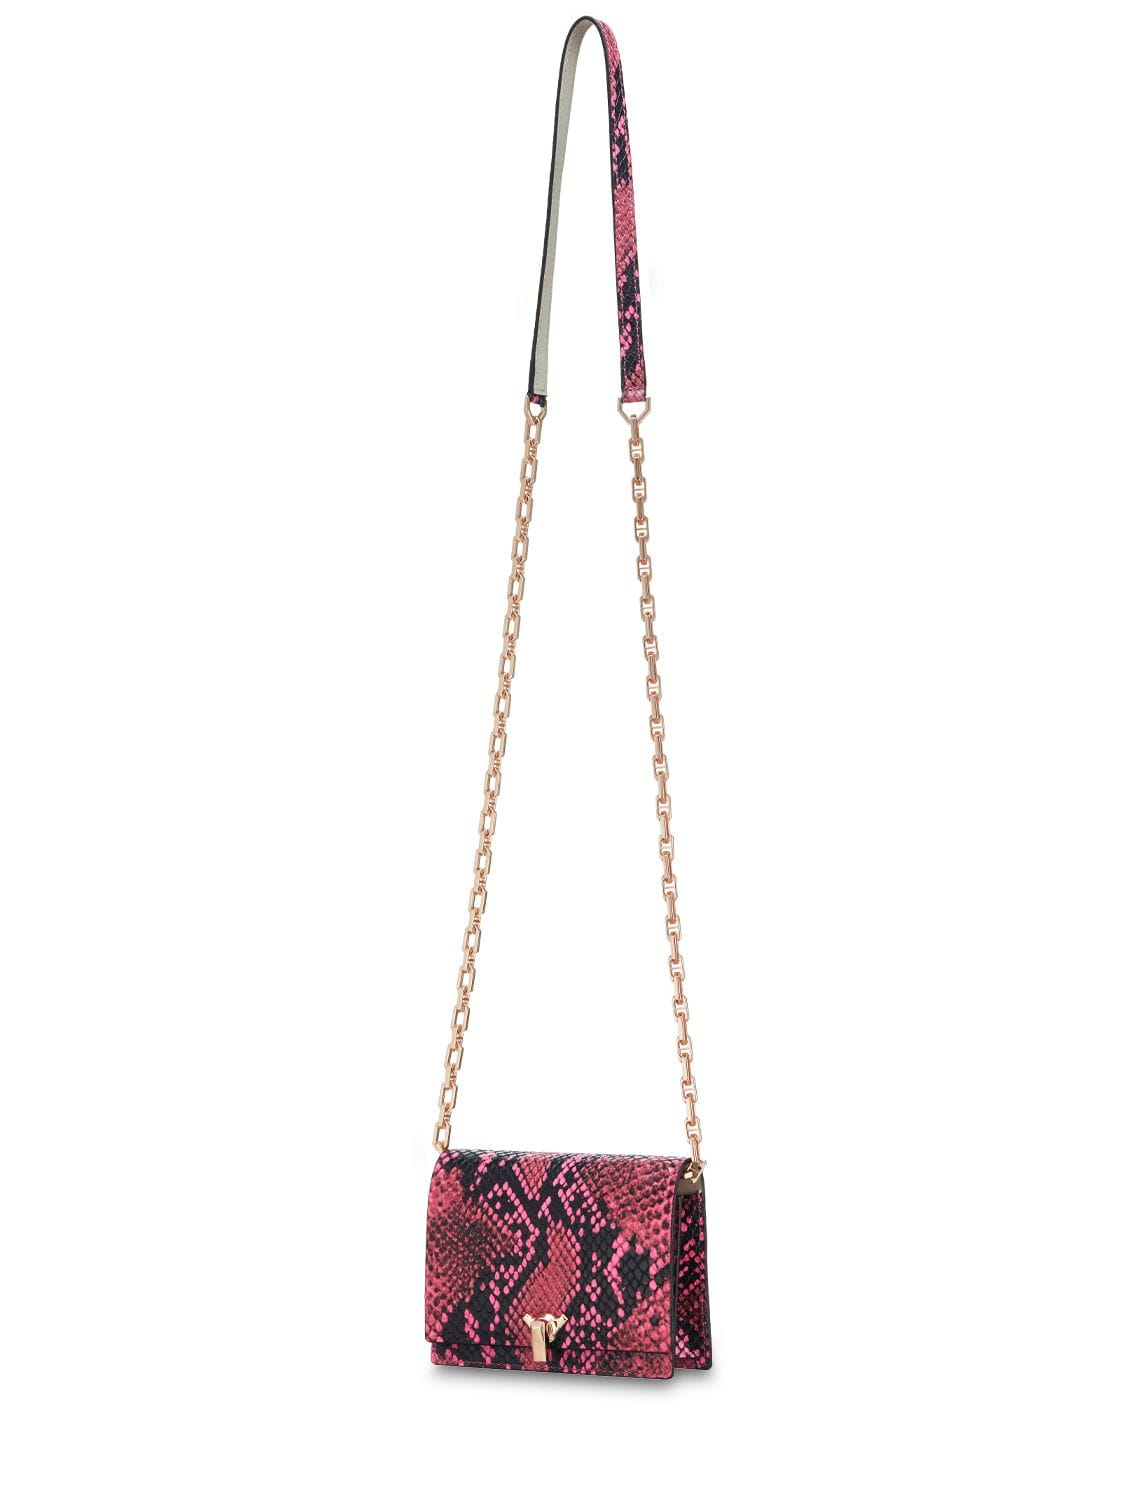 The Volon Po Poket Snake Printed Leather Bag In Neon Pink